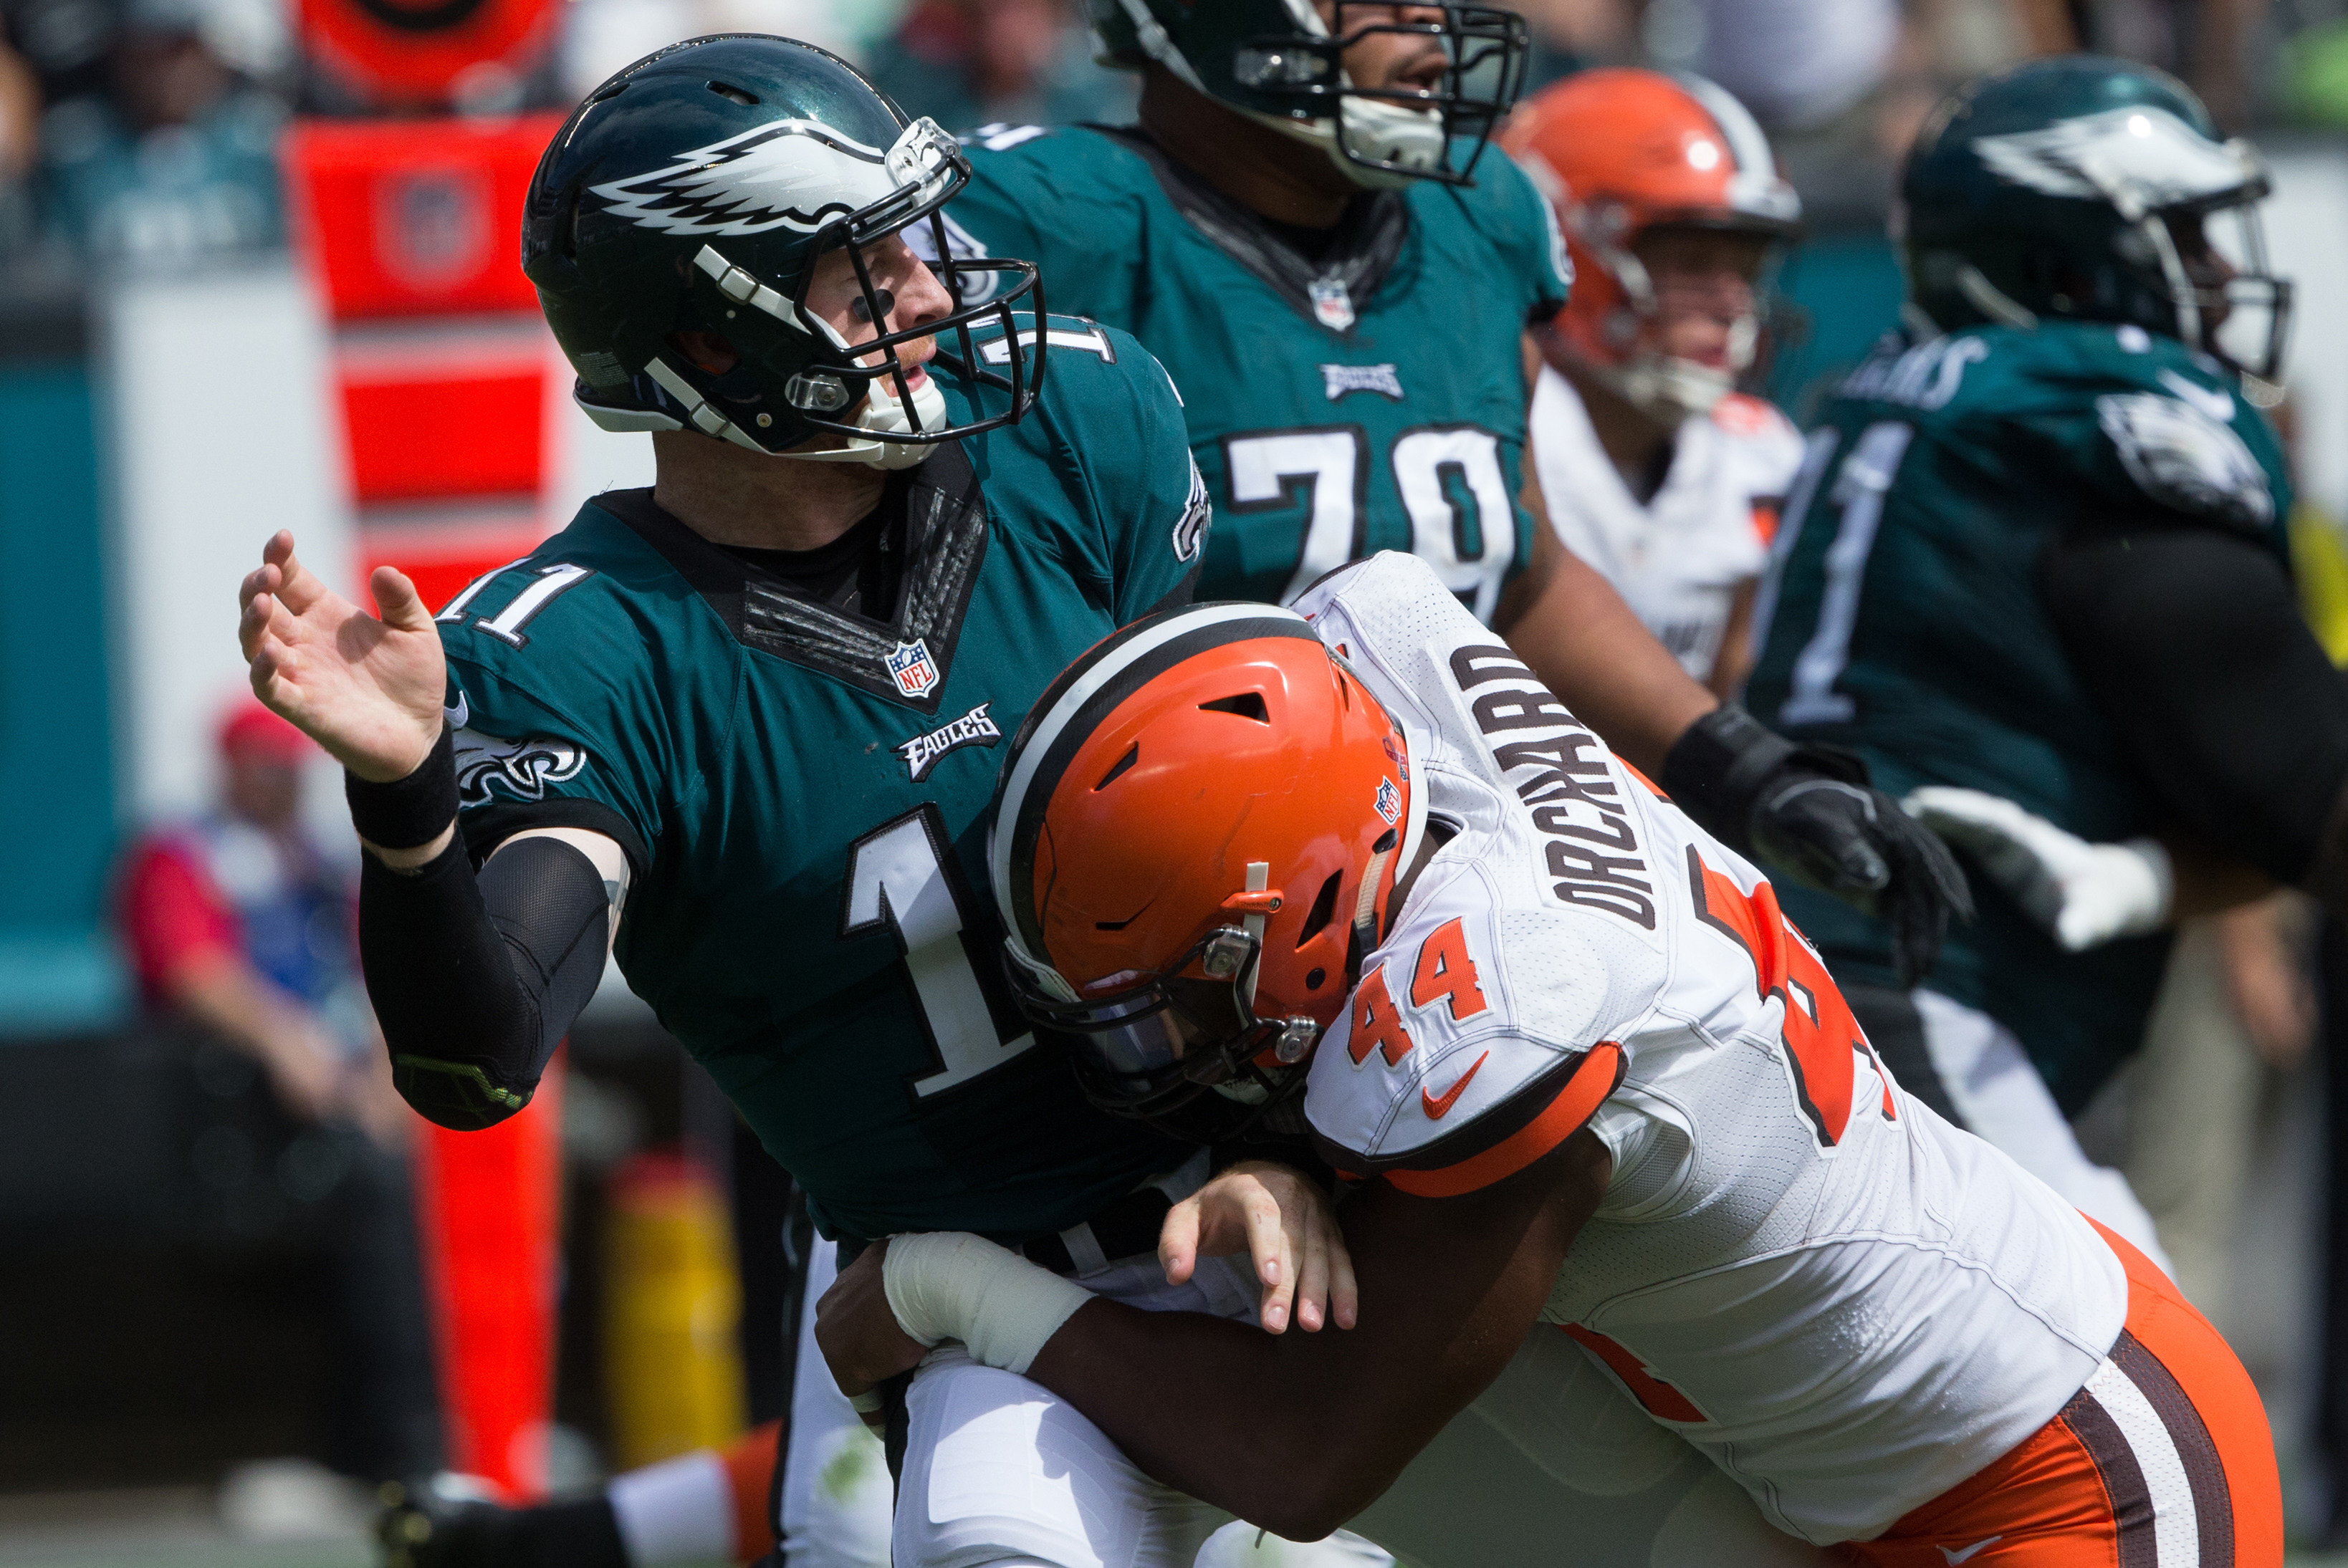 Can a position switch save Nate Orchard's career? - Dawg Pound Daily